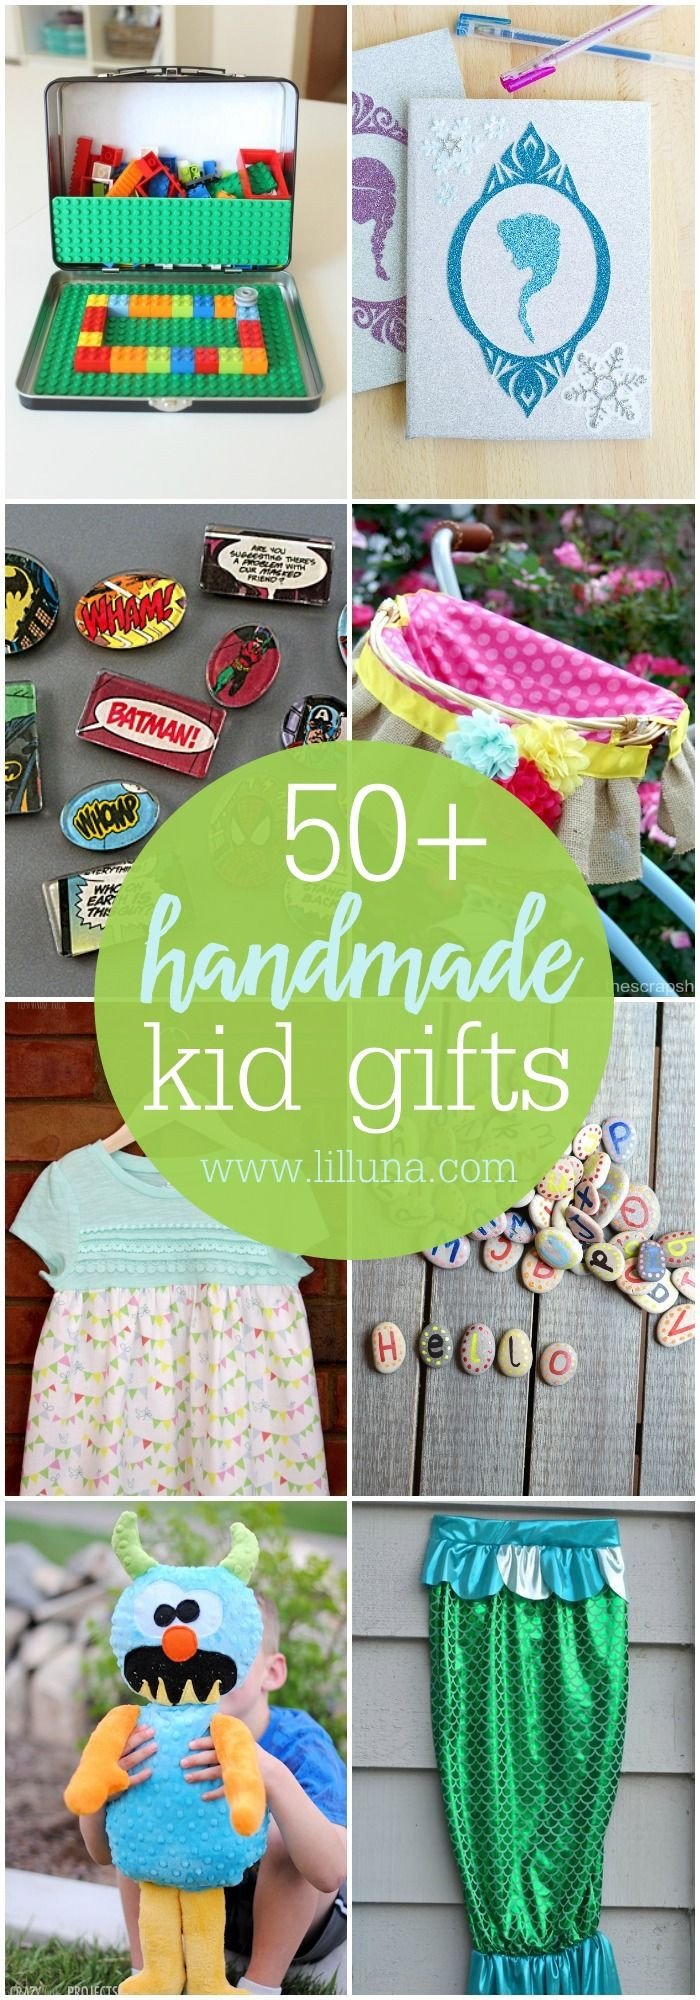 Creative Gifts For Kids
 50 Handmade Gift ideas for Kids so many great ideas to